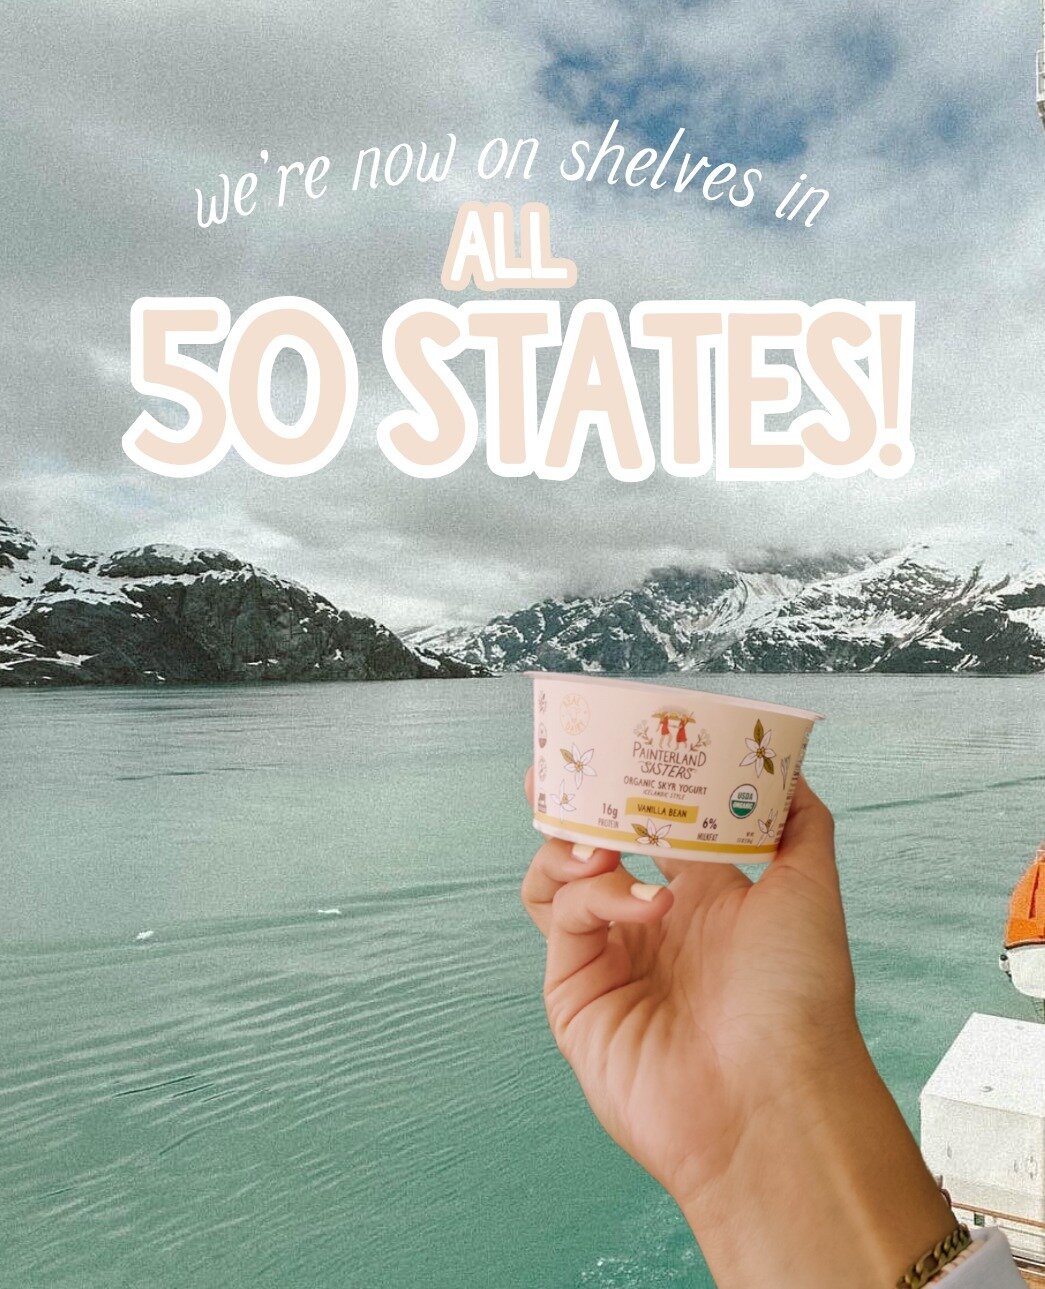 We officially hit the shelves in Alaska, which means we are now available in ALL 50 STATES!!!!!!!!!! WAHOOOO!!! 🎉💫🌎⁠
⁠
How cool is it that milk from our family's farm in Pennsylvania and others like it can be found in stores all across the country